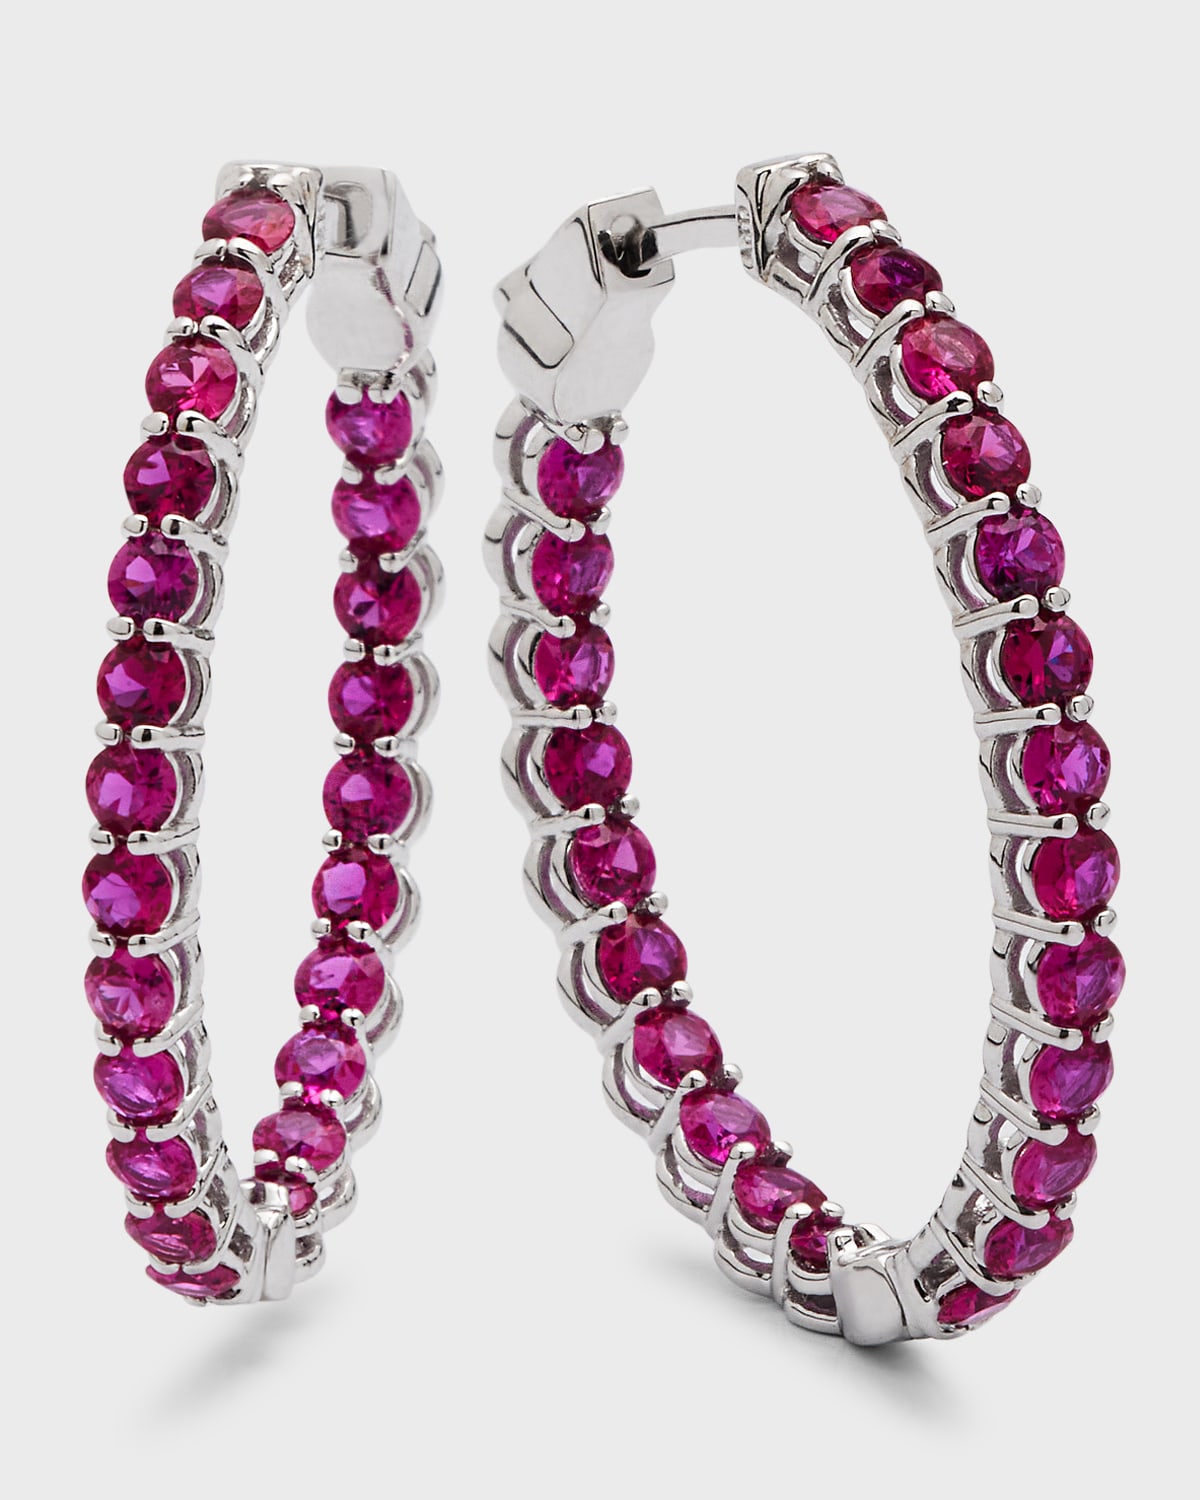 NM Diamond Collection Small Ruby Hoop Earrings in 18K White Gold